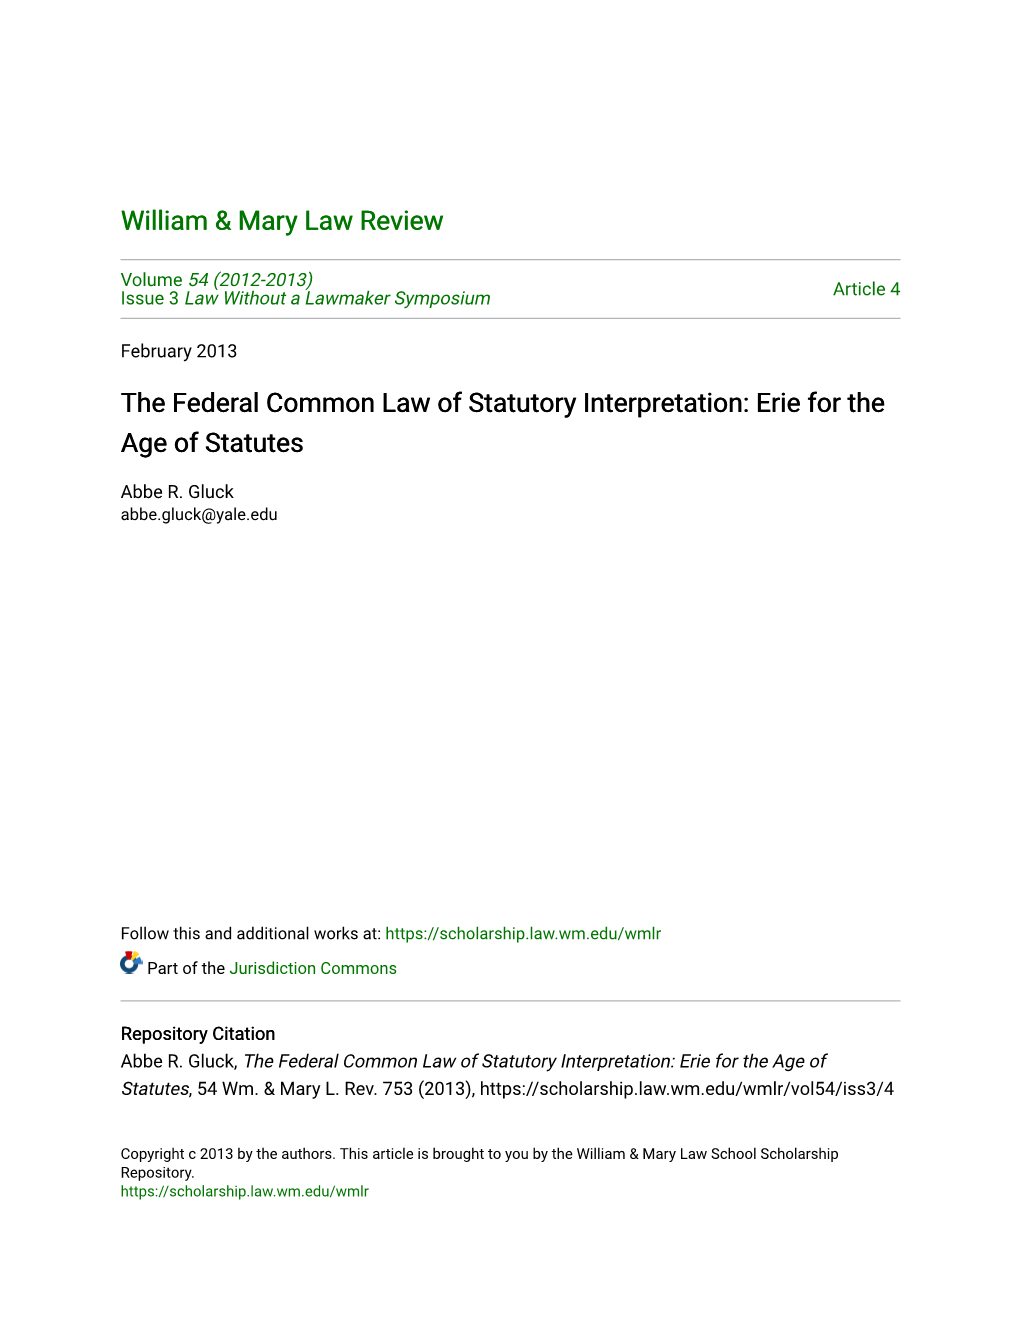 The Federal Common Law of Statutory Interpretation: Erie for the Age of Statutes